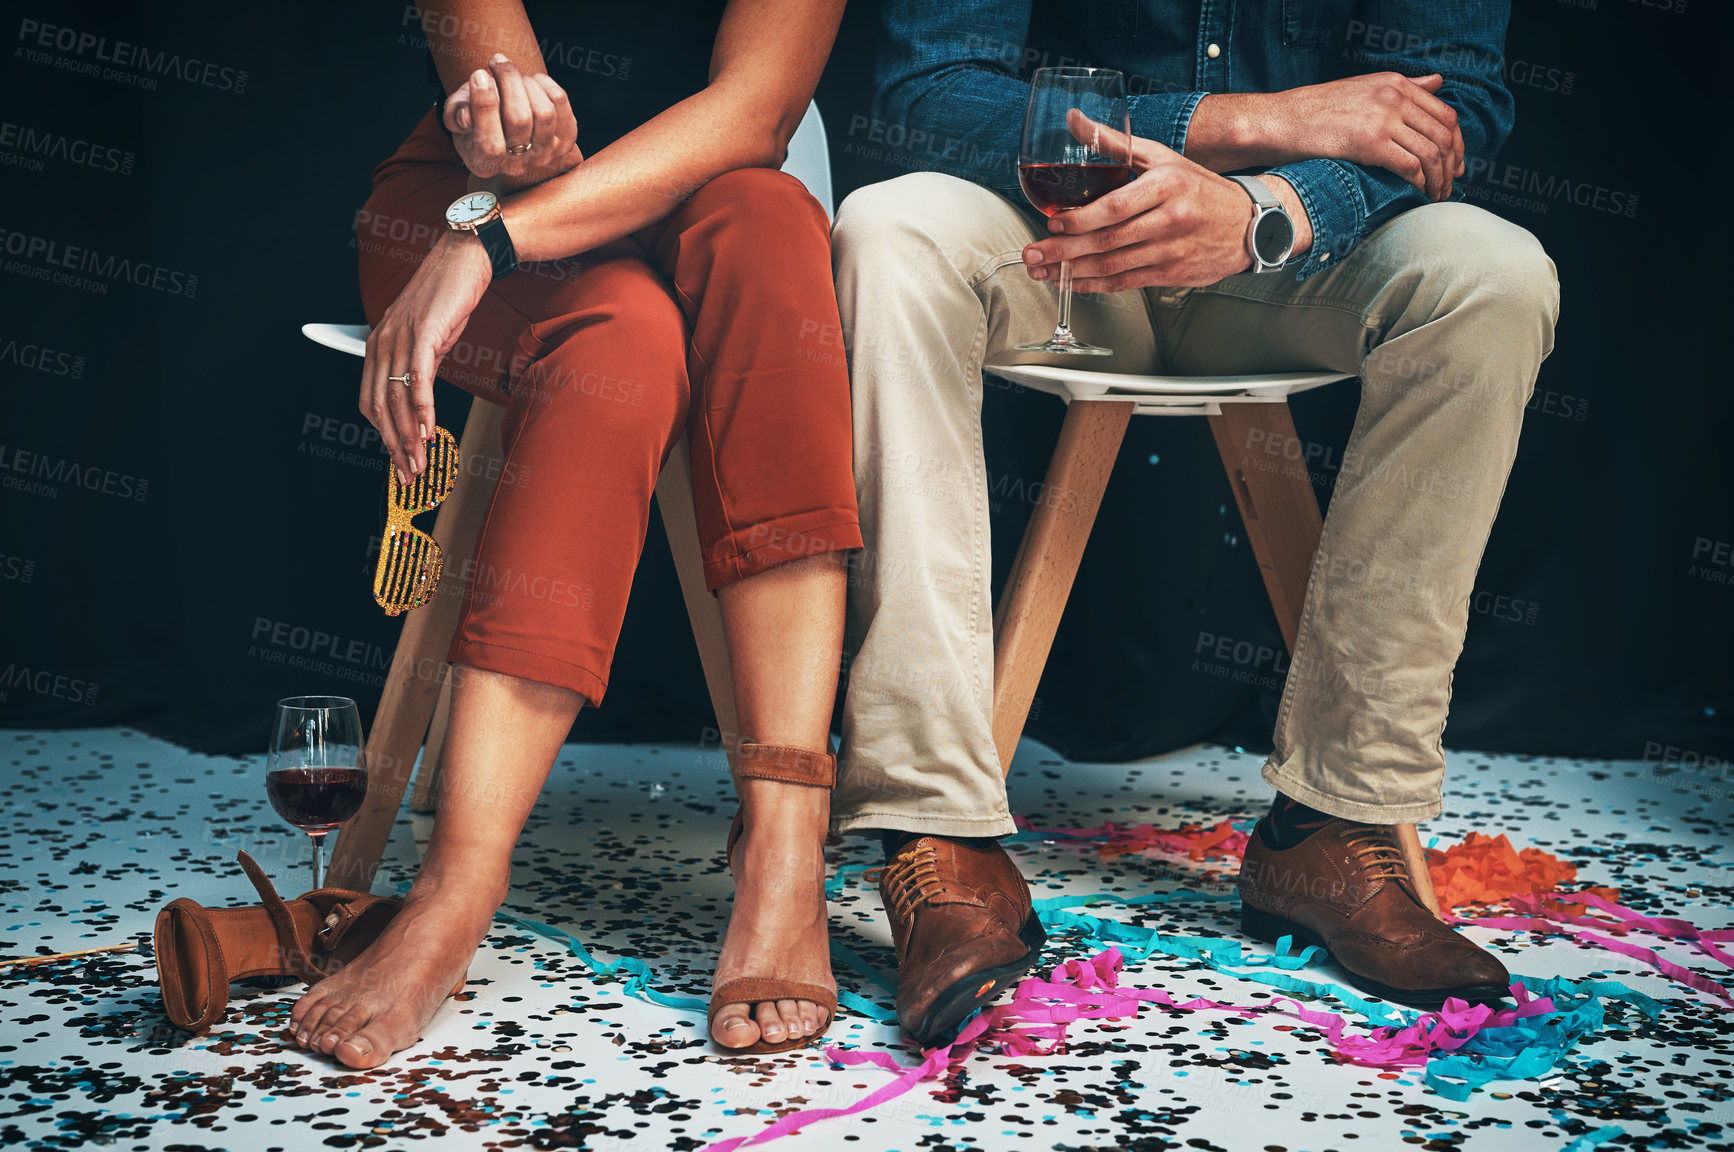 Buy stock photo Feet, man and woman sitting at a party to celebrate new years eve and socialise together. Legs, couple and celebrating while partying together at a festive celebration or event with confetti 